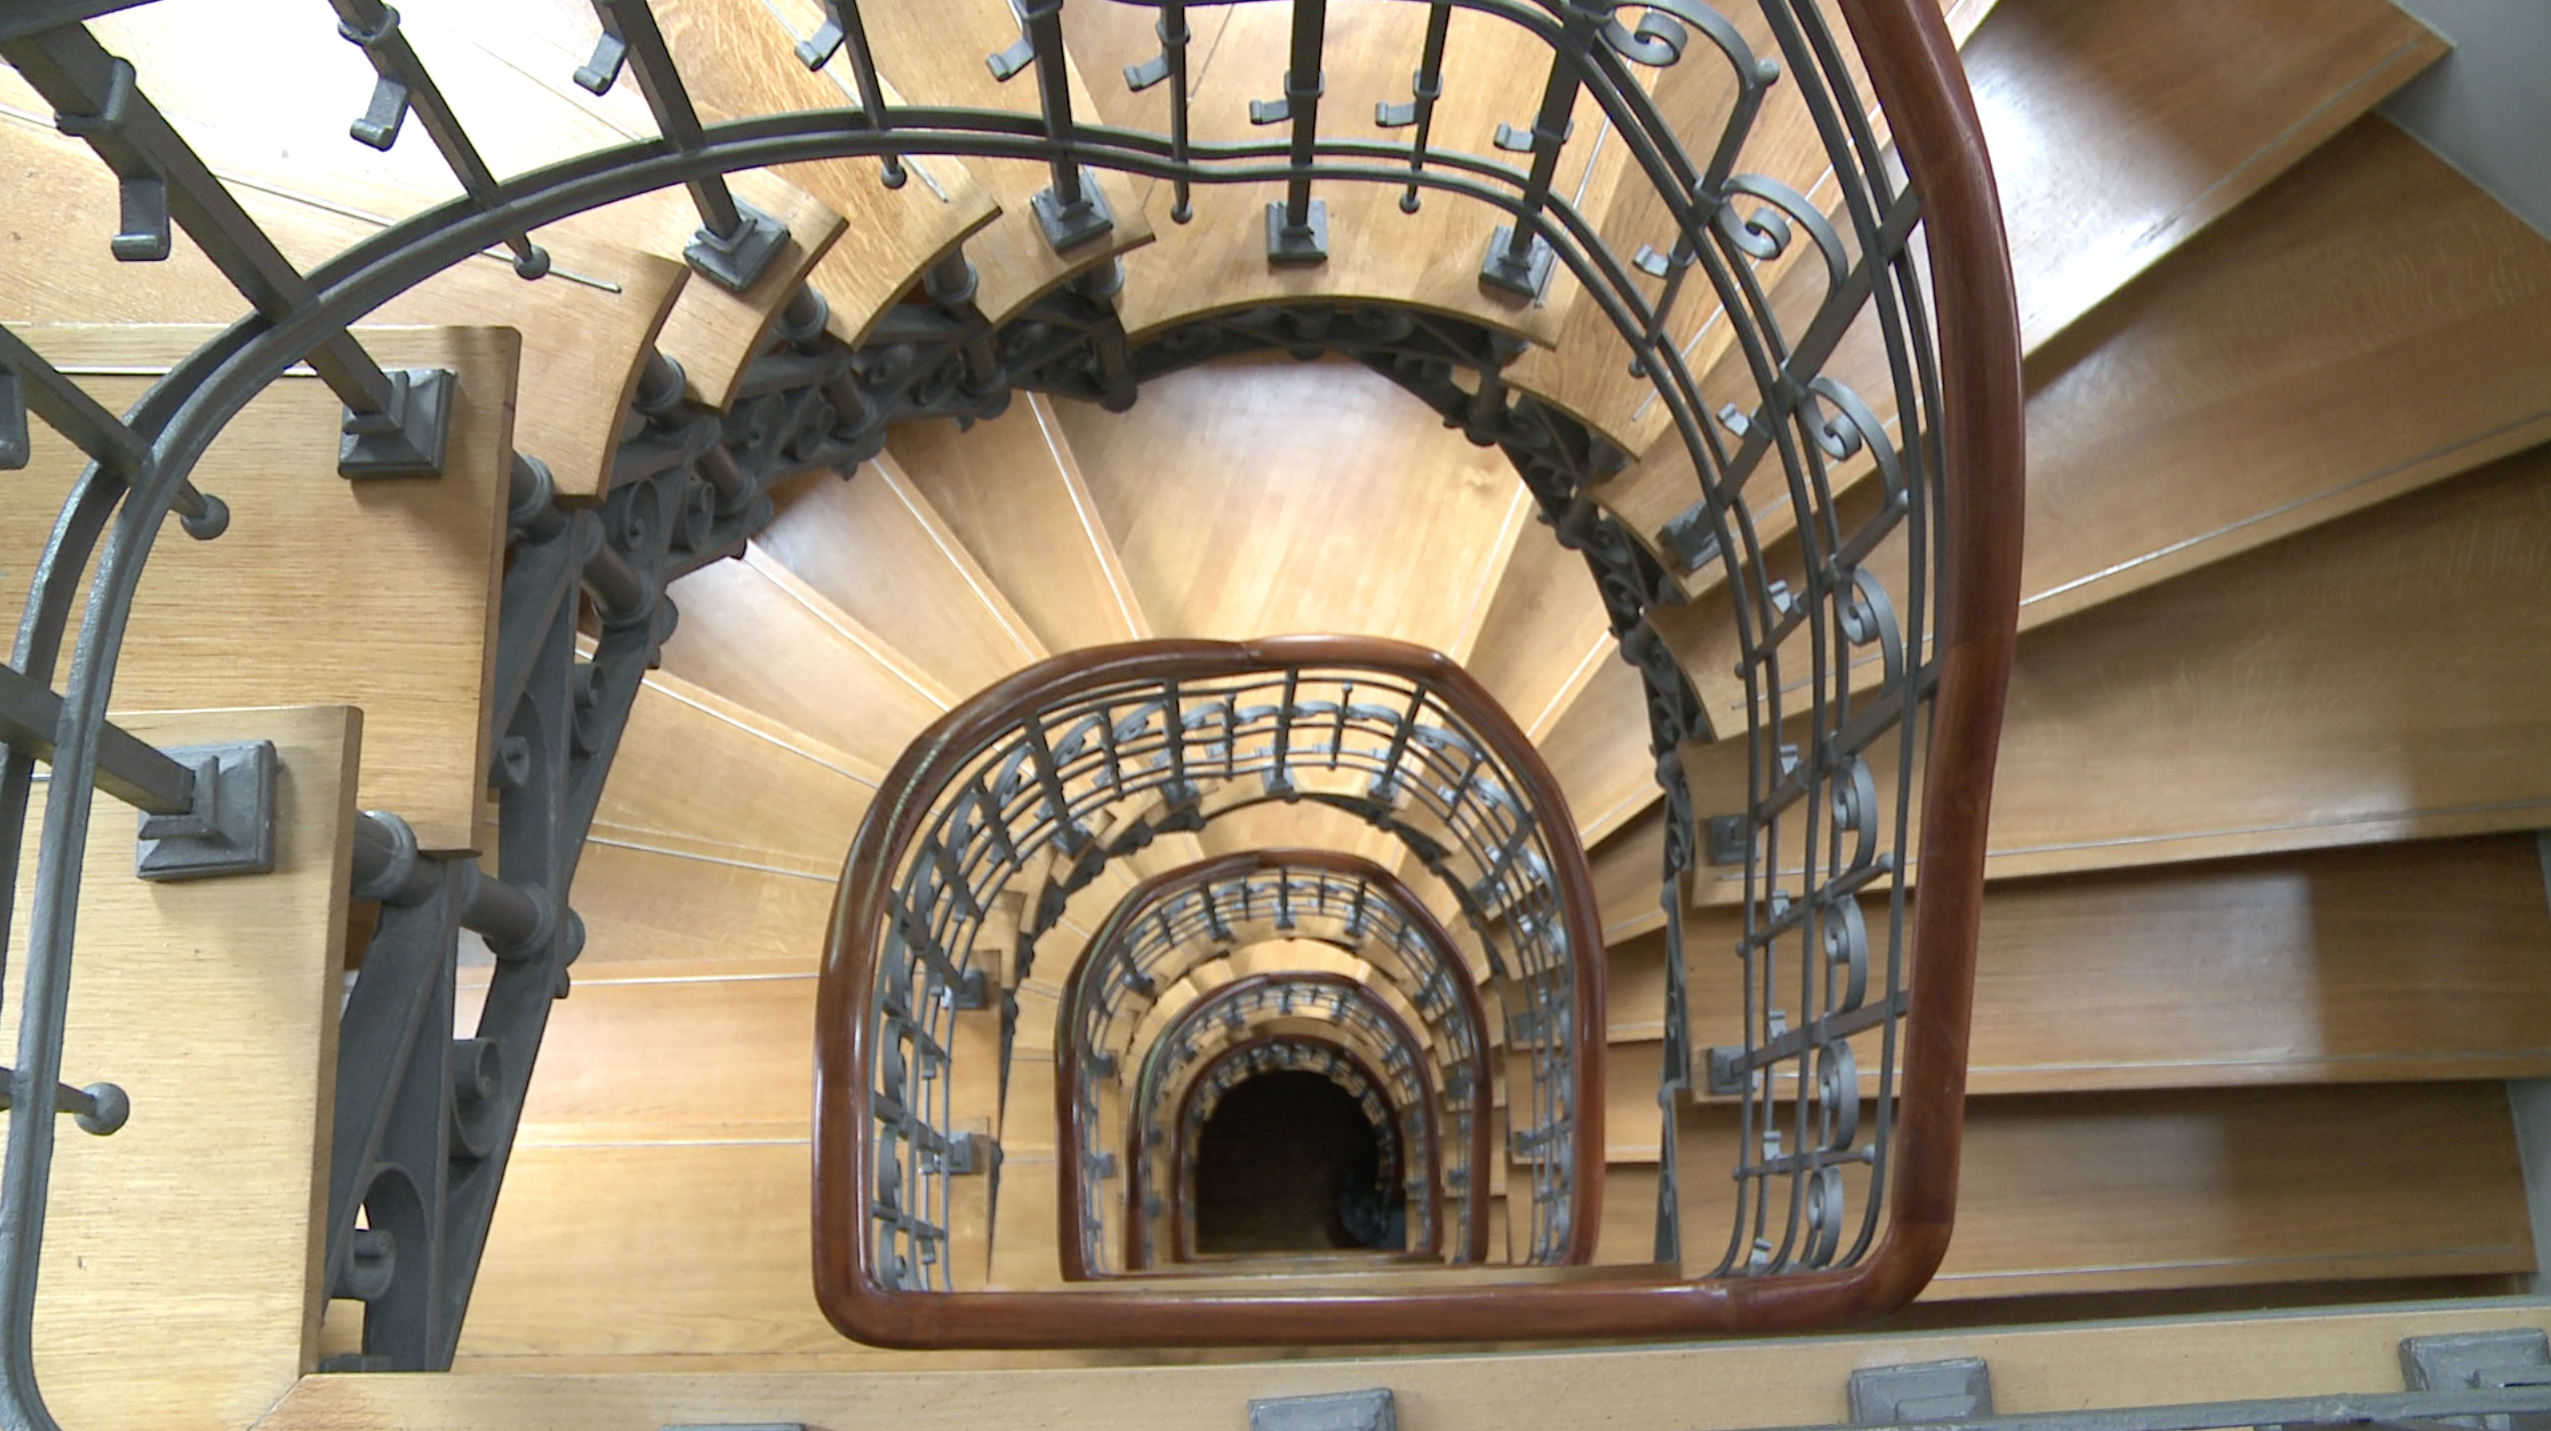 The spiral staircase in the institute building.